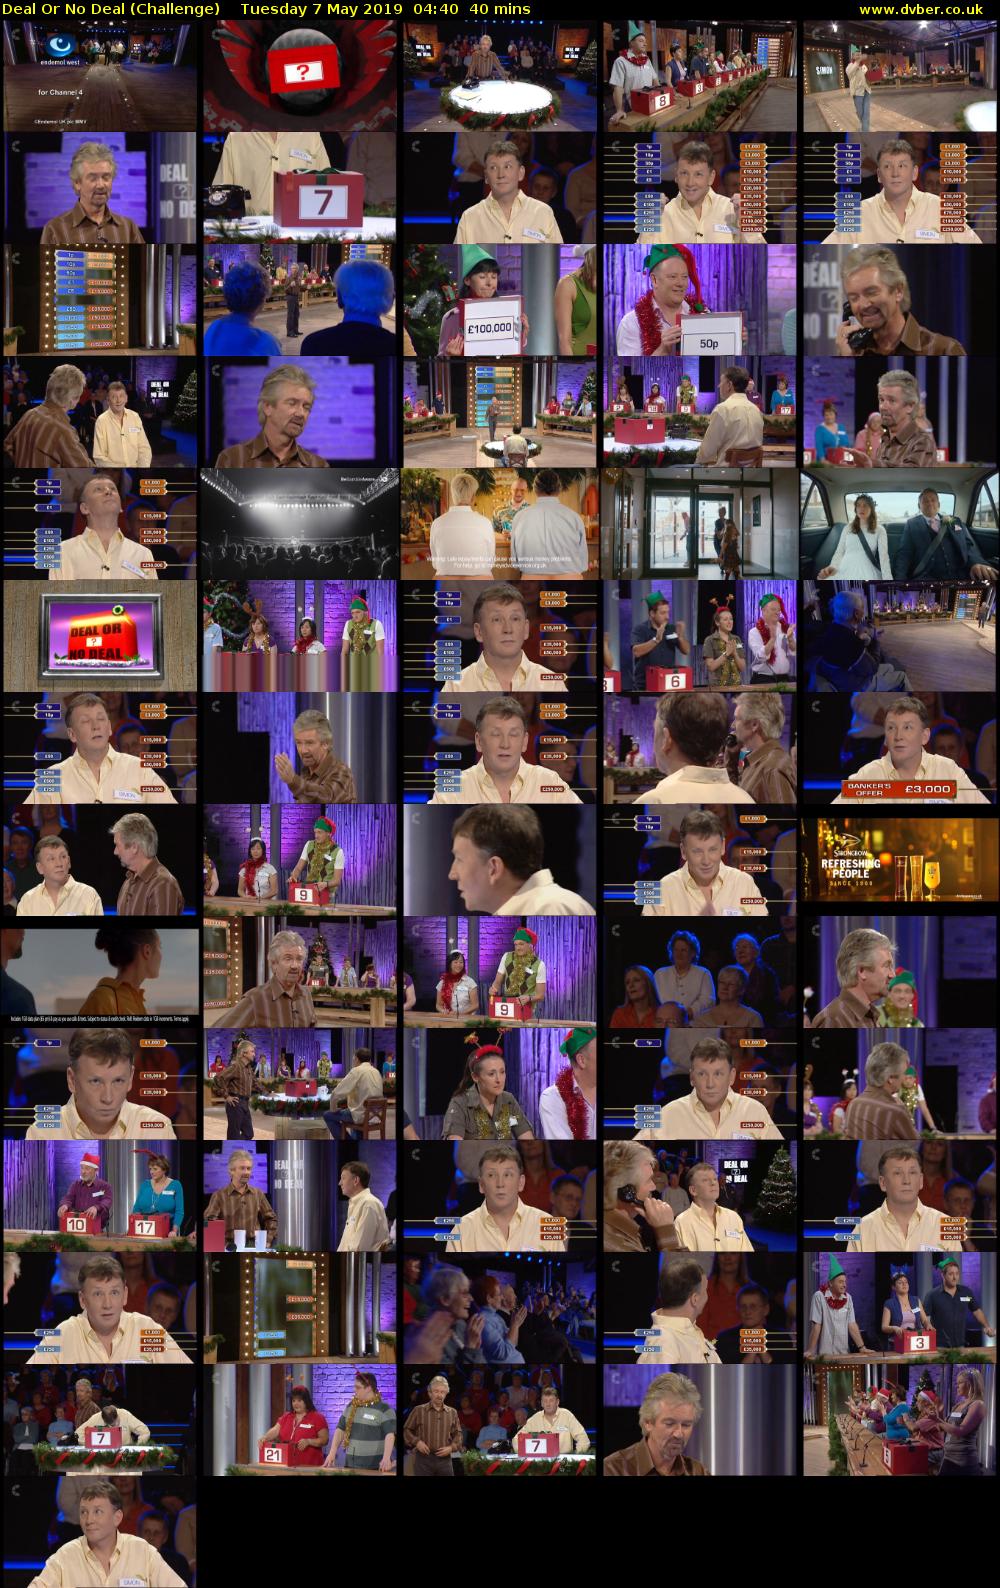 Deal Or No Deal (Challenge) Tuesday 7 May 2019 04:40 - 05:20